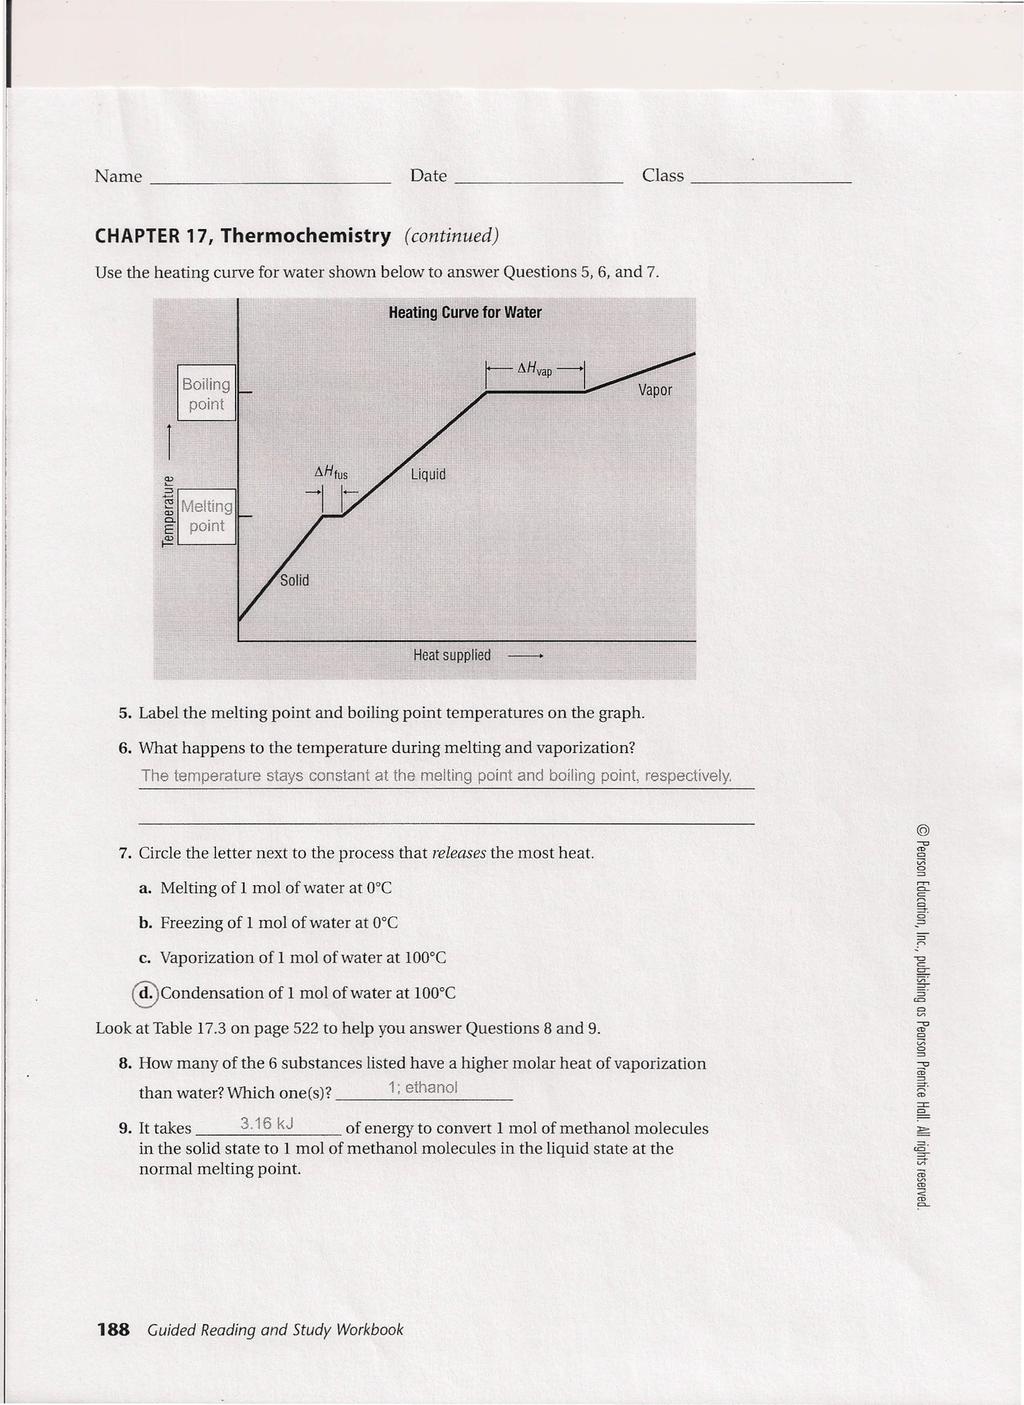 CHAPTER 17, Thermochemistry (continued) Use the heating curve for water shown below to answer Questions 5,6, and 7.